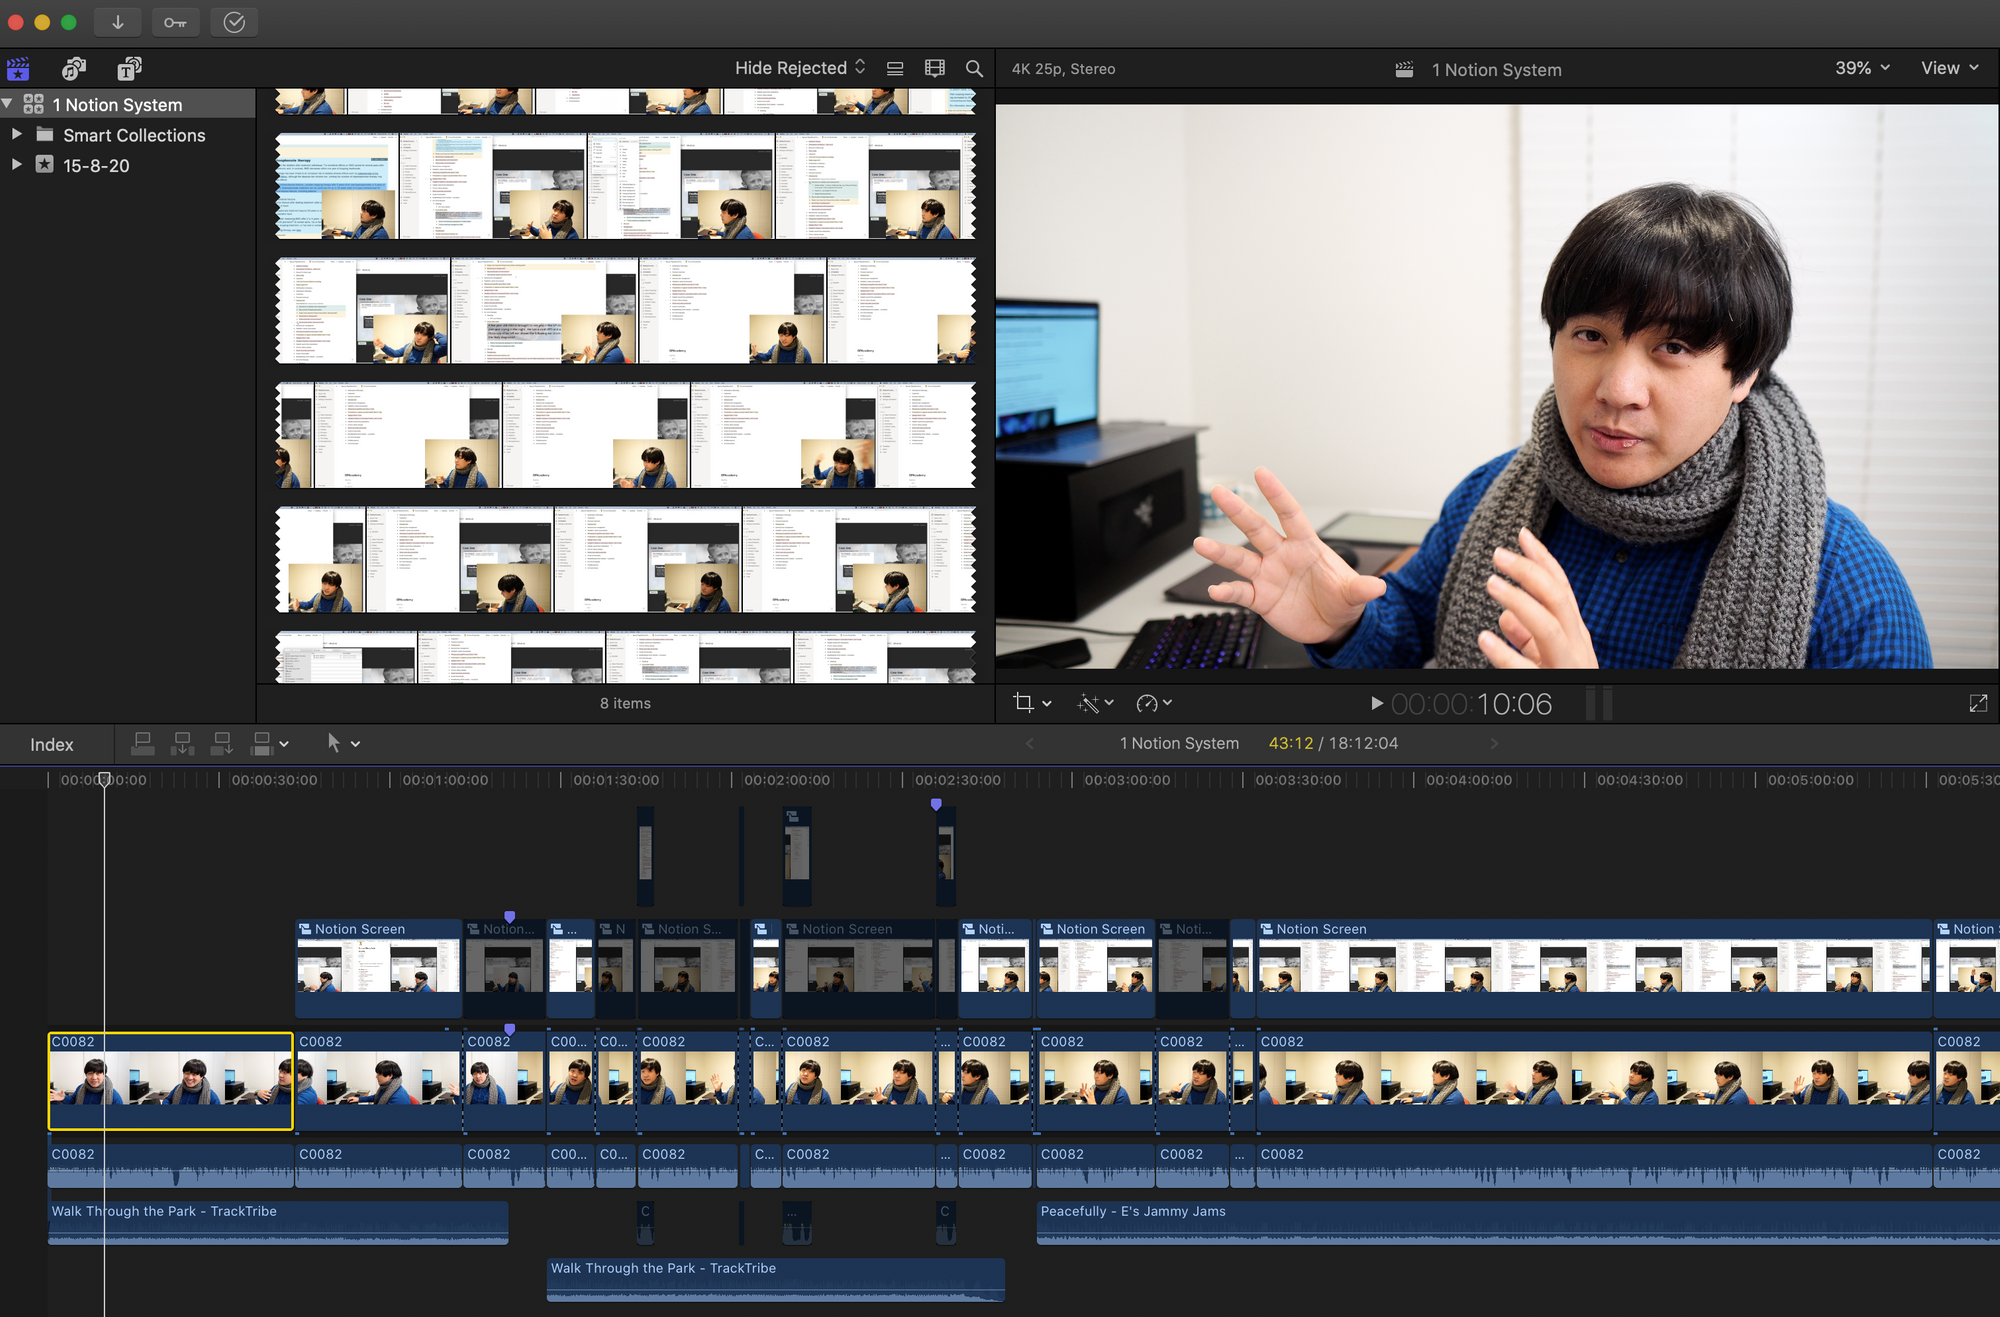 My Current YouTube Video Creation Workflow (Recording Films -> Final Cut Pro) - Work in Progress